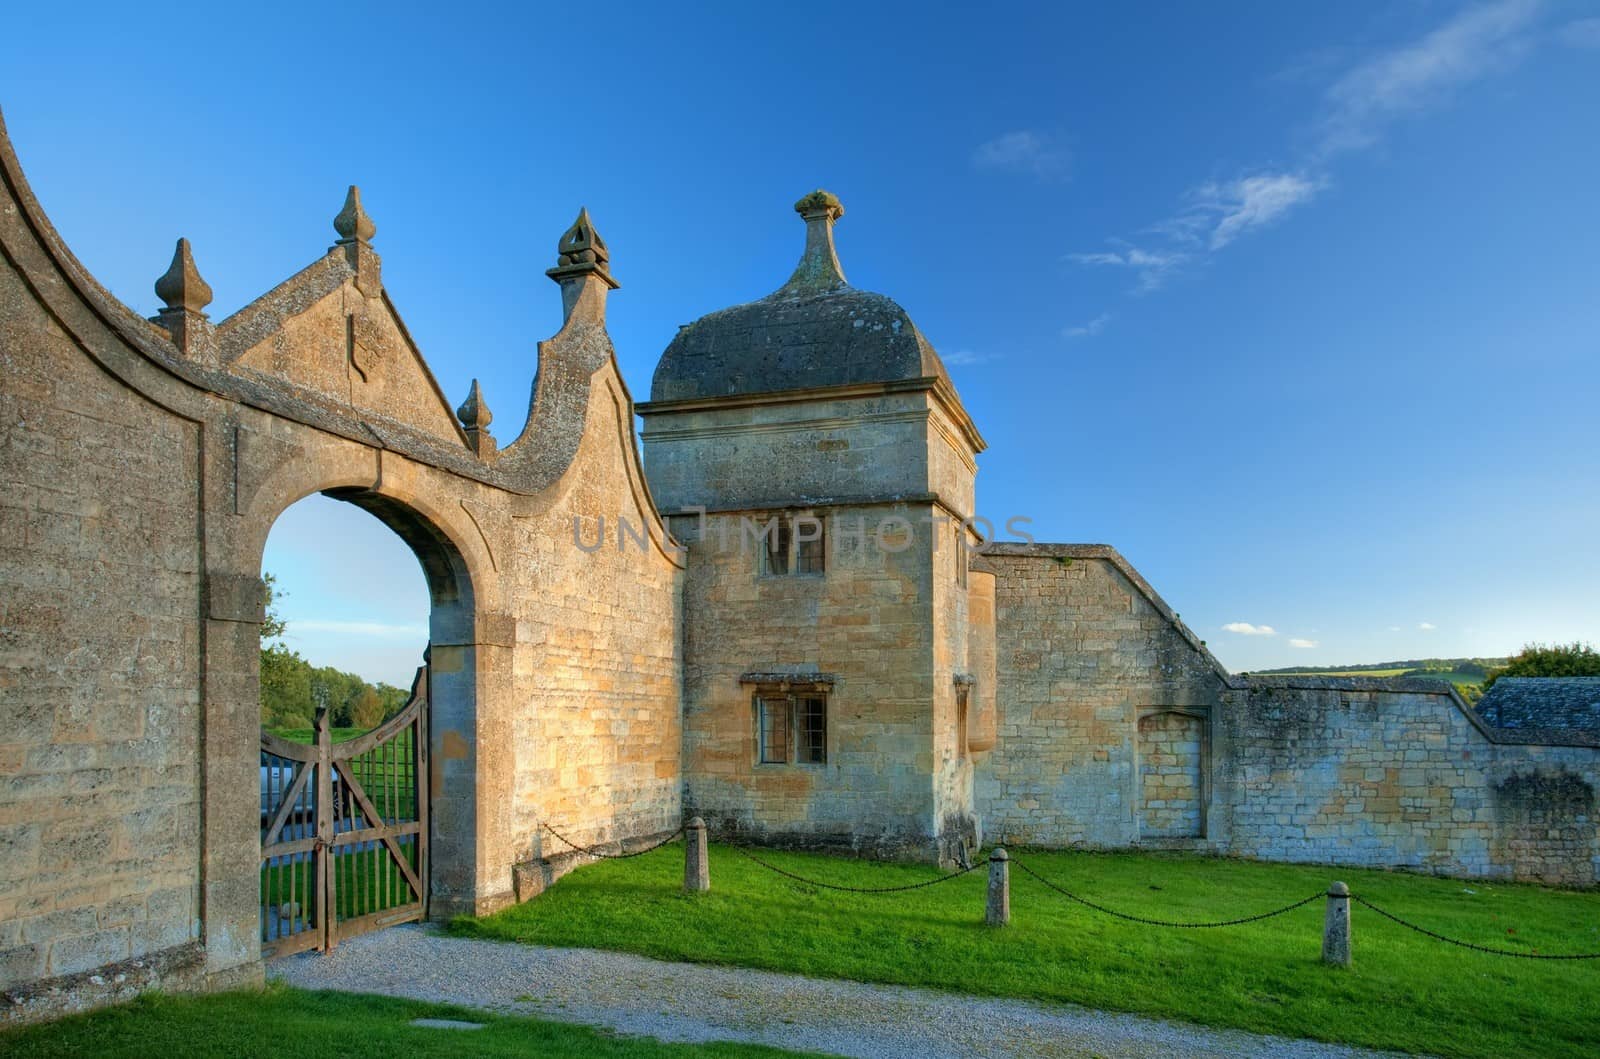 The historic Jacobean gatehouse to the Banqueting Hall at Chipping Campden, Gloucestershire, England.